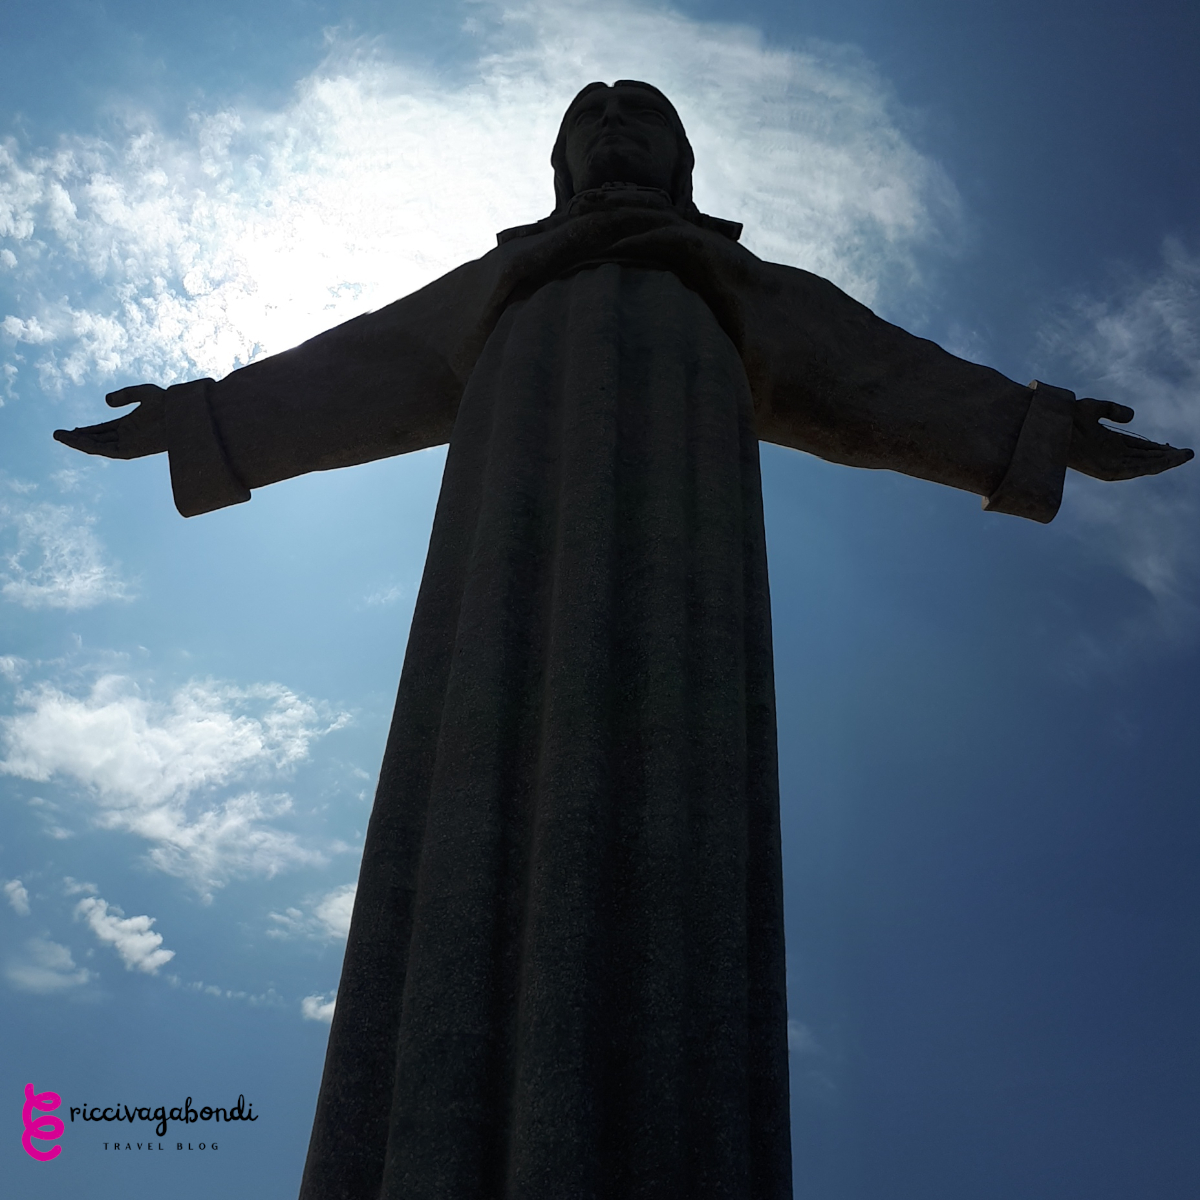 View of the Christ statue from below in Lisbon, Portugal